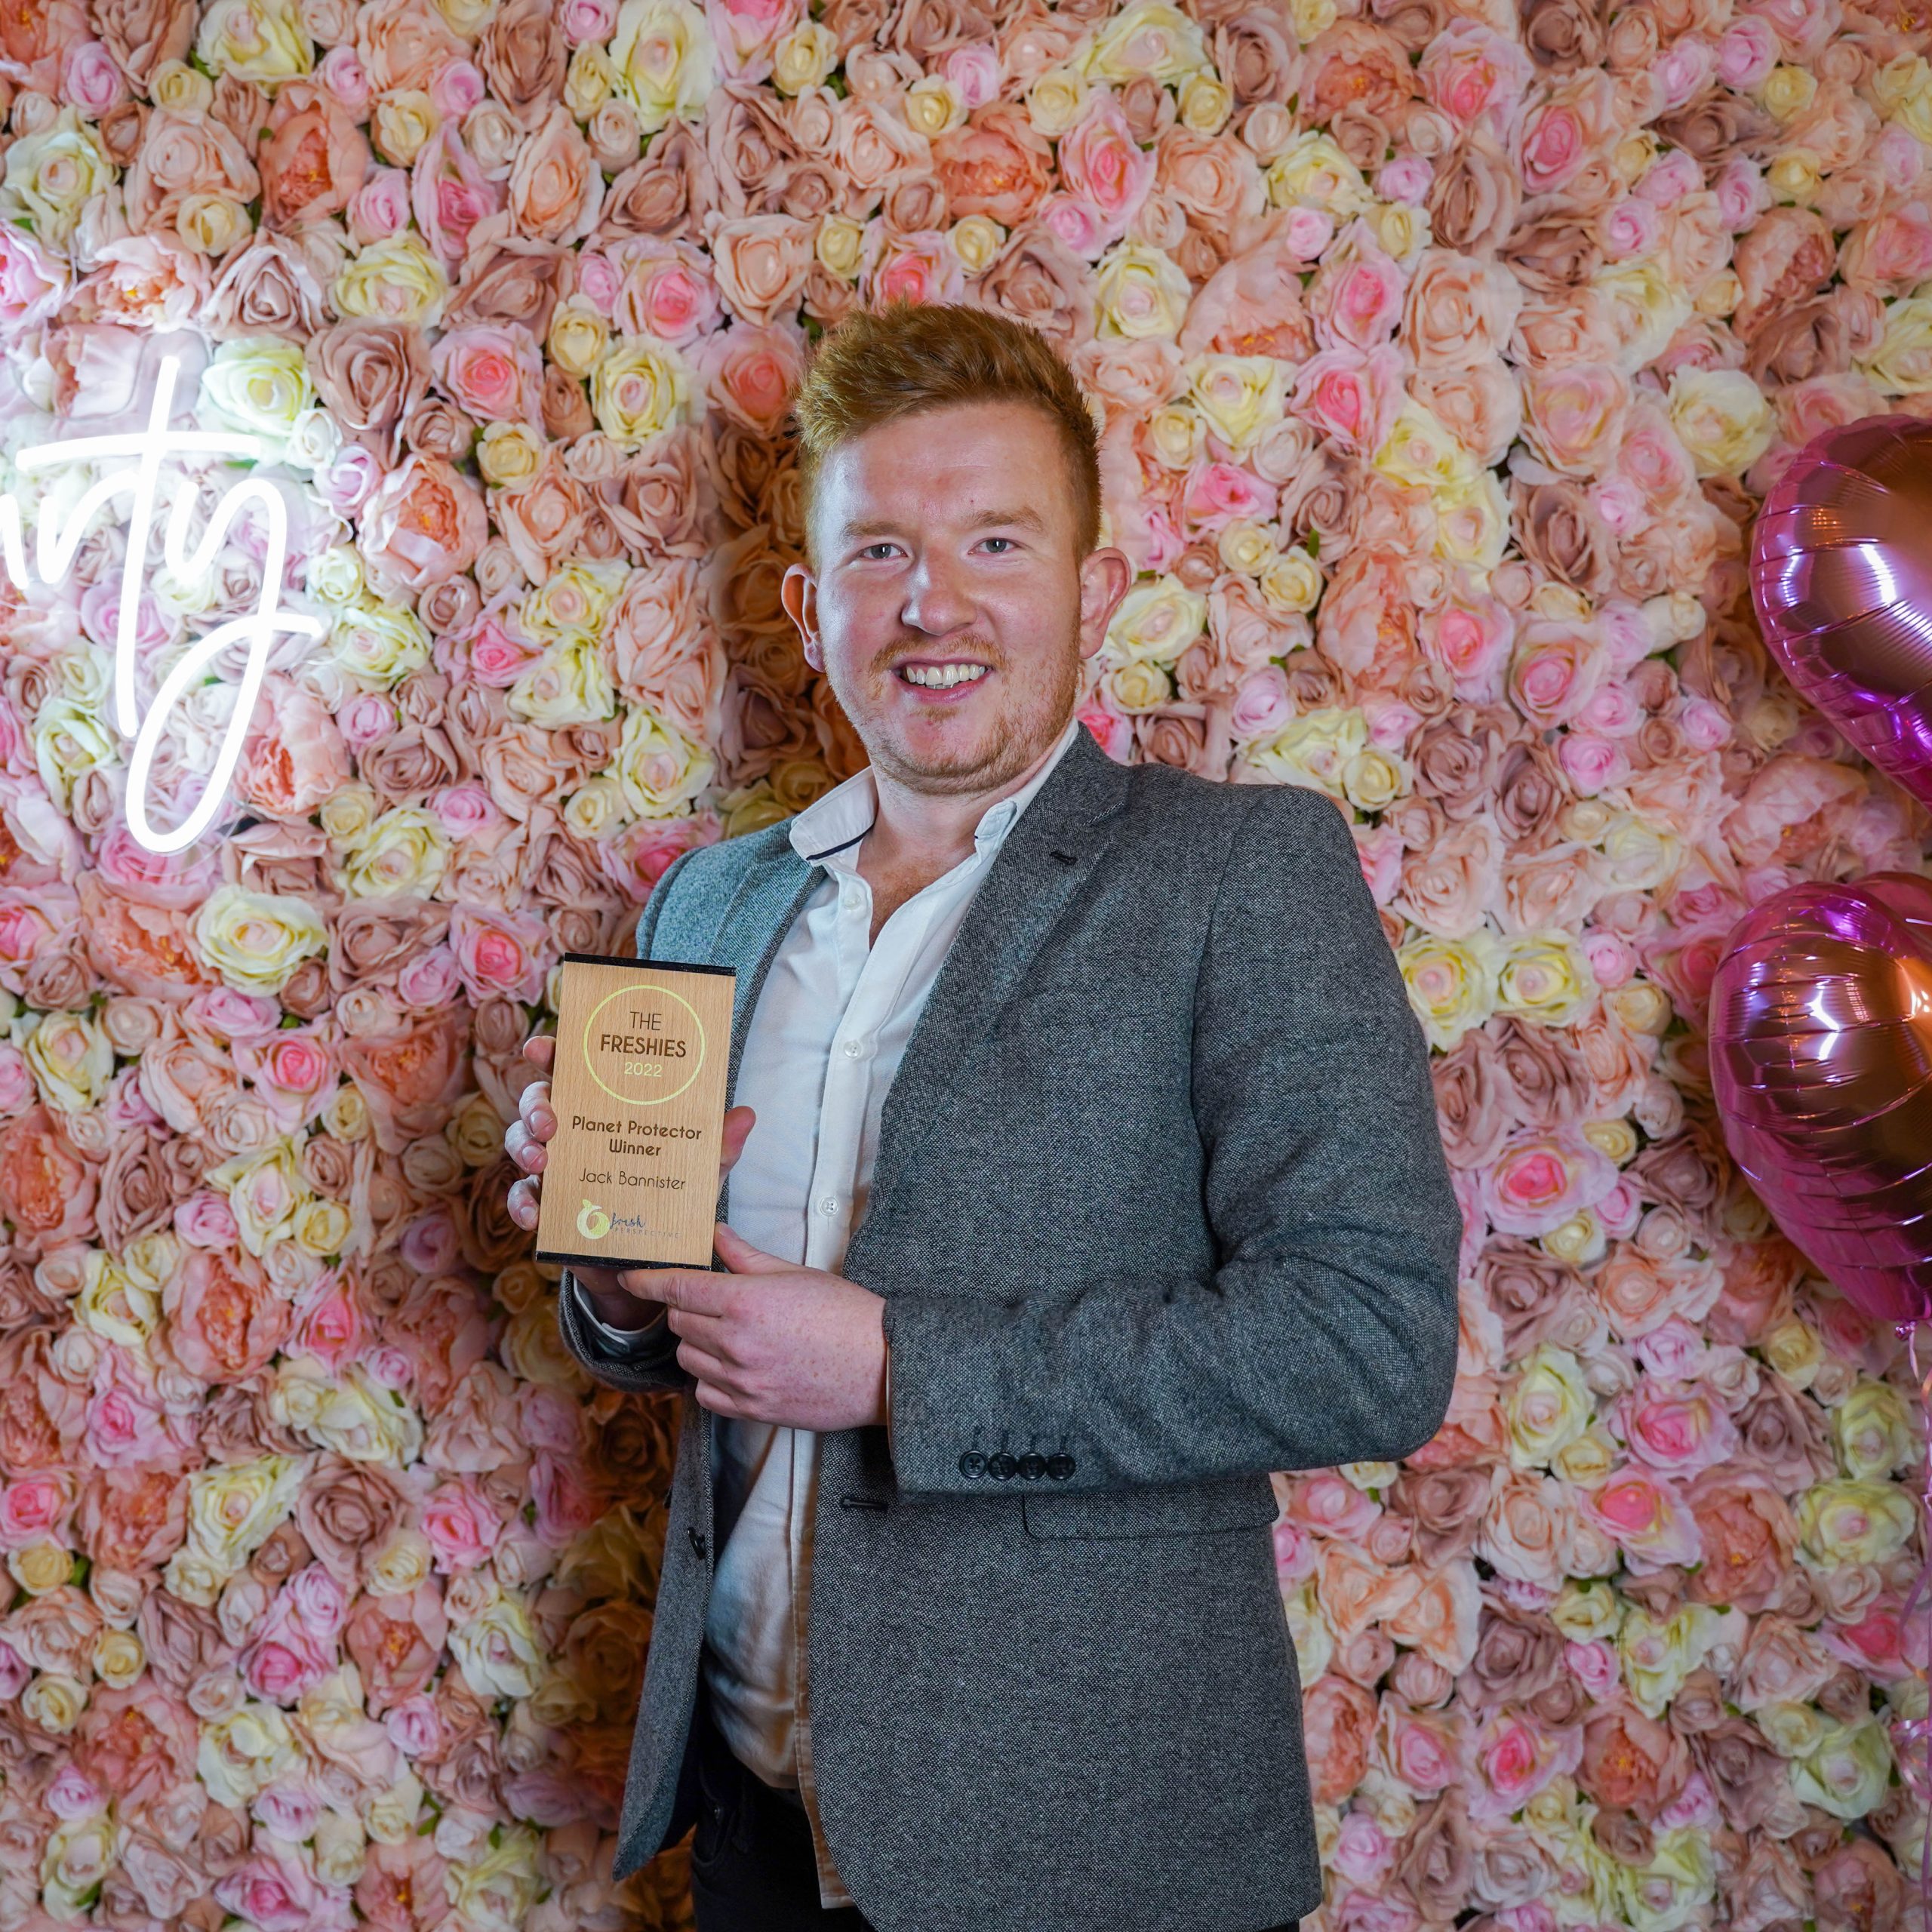 The Freshies 2022 Planet Protector winner - Jack Bannister. Stood in front of a floral wall, two pink heart balloons and a neon sign. Jack is holding his award and smiling.